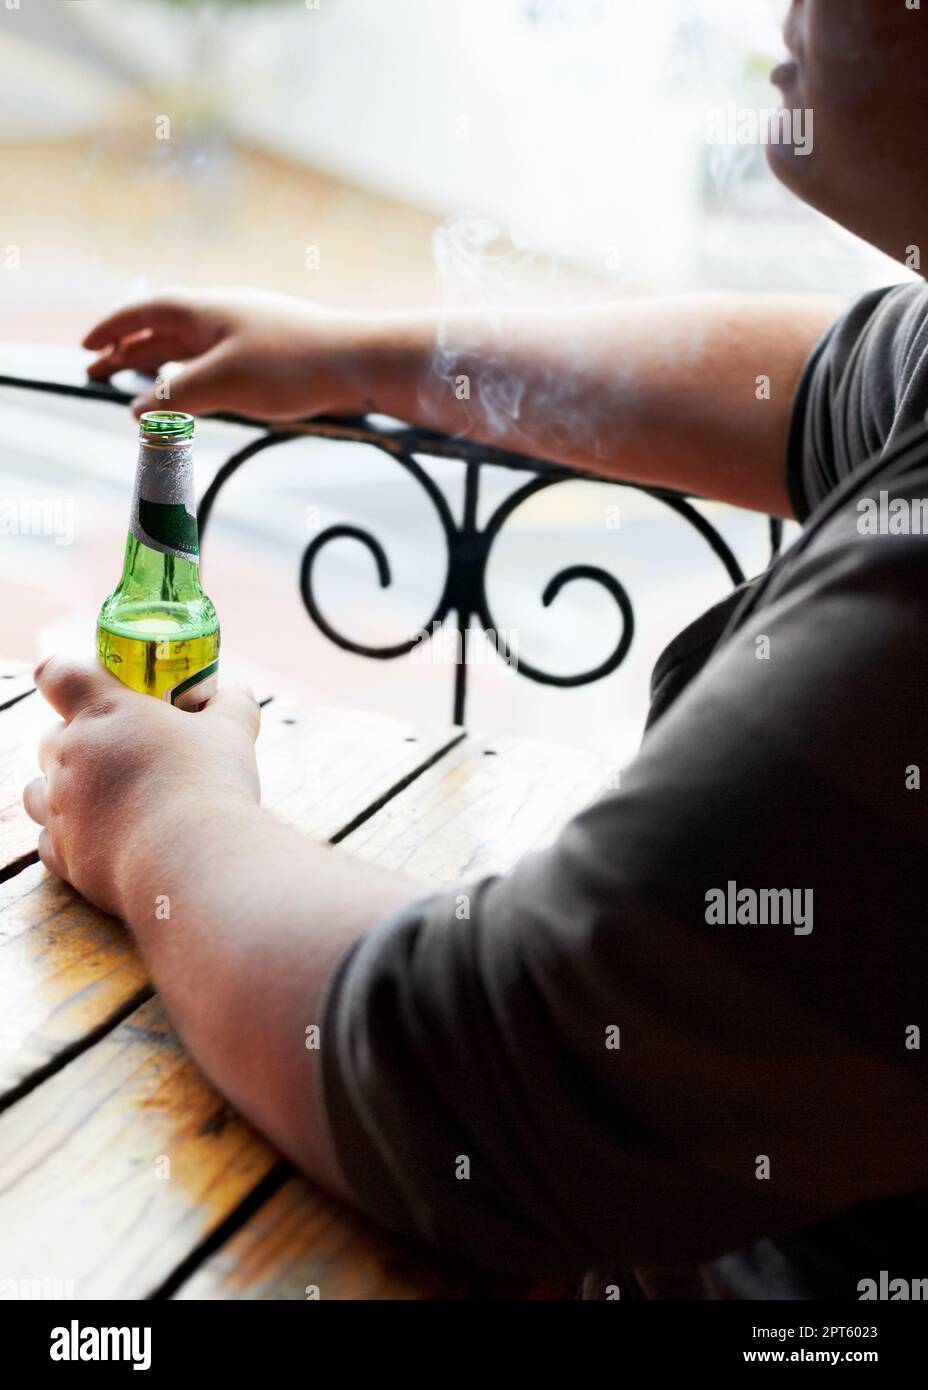 Indulging in lifes little pleasures. A cropped image of a young man smoking while sitting with a beer in front of him Stock Photo